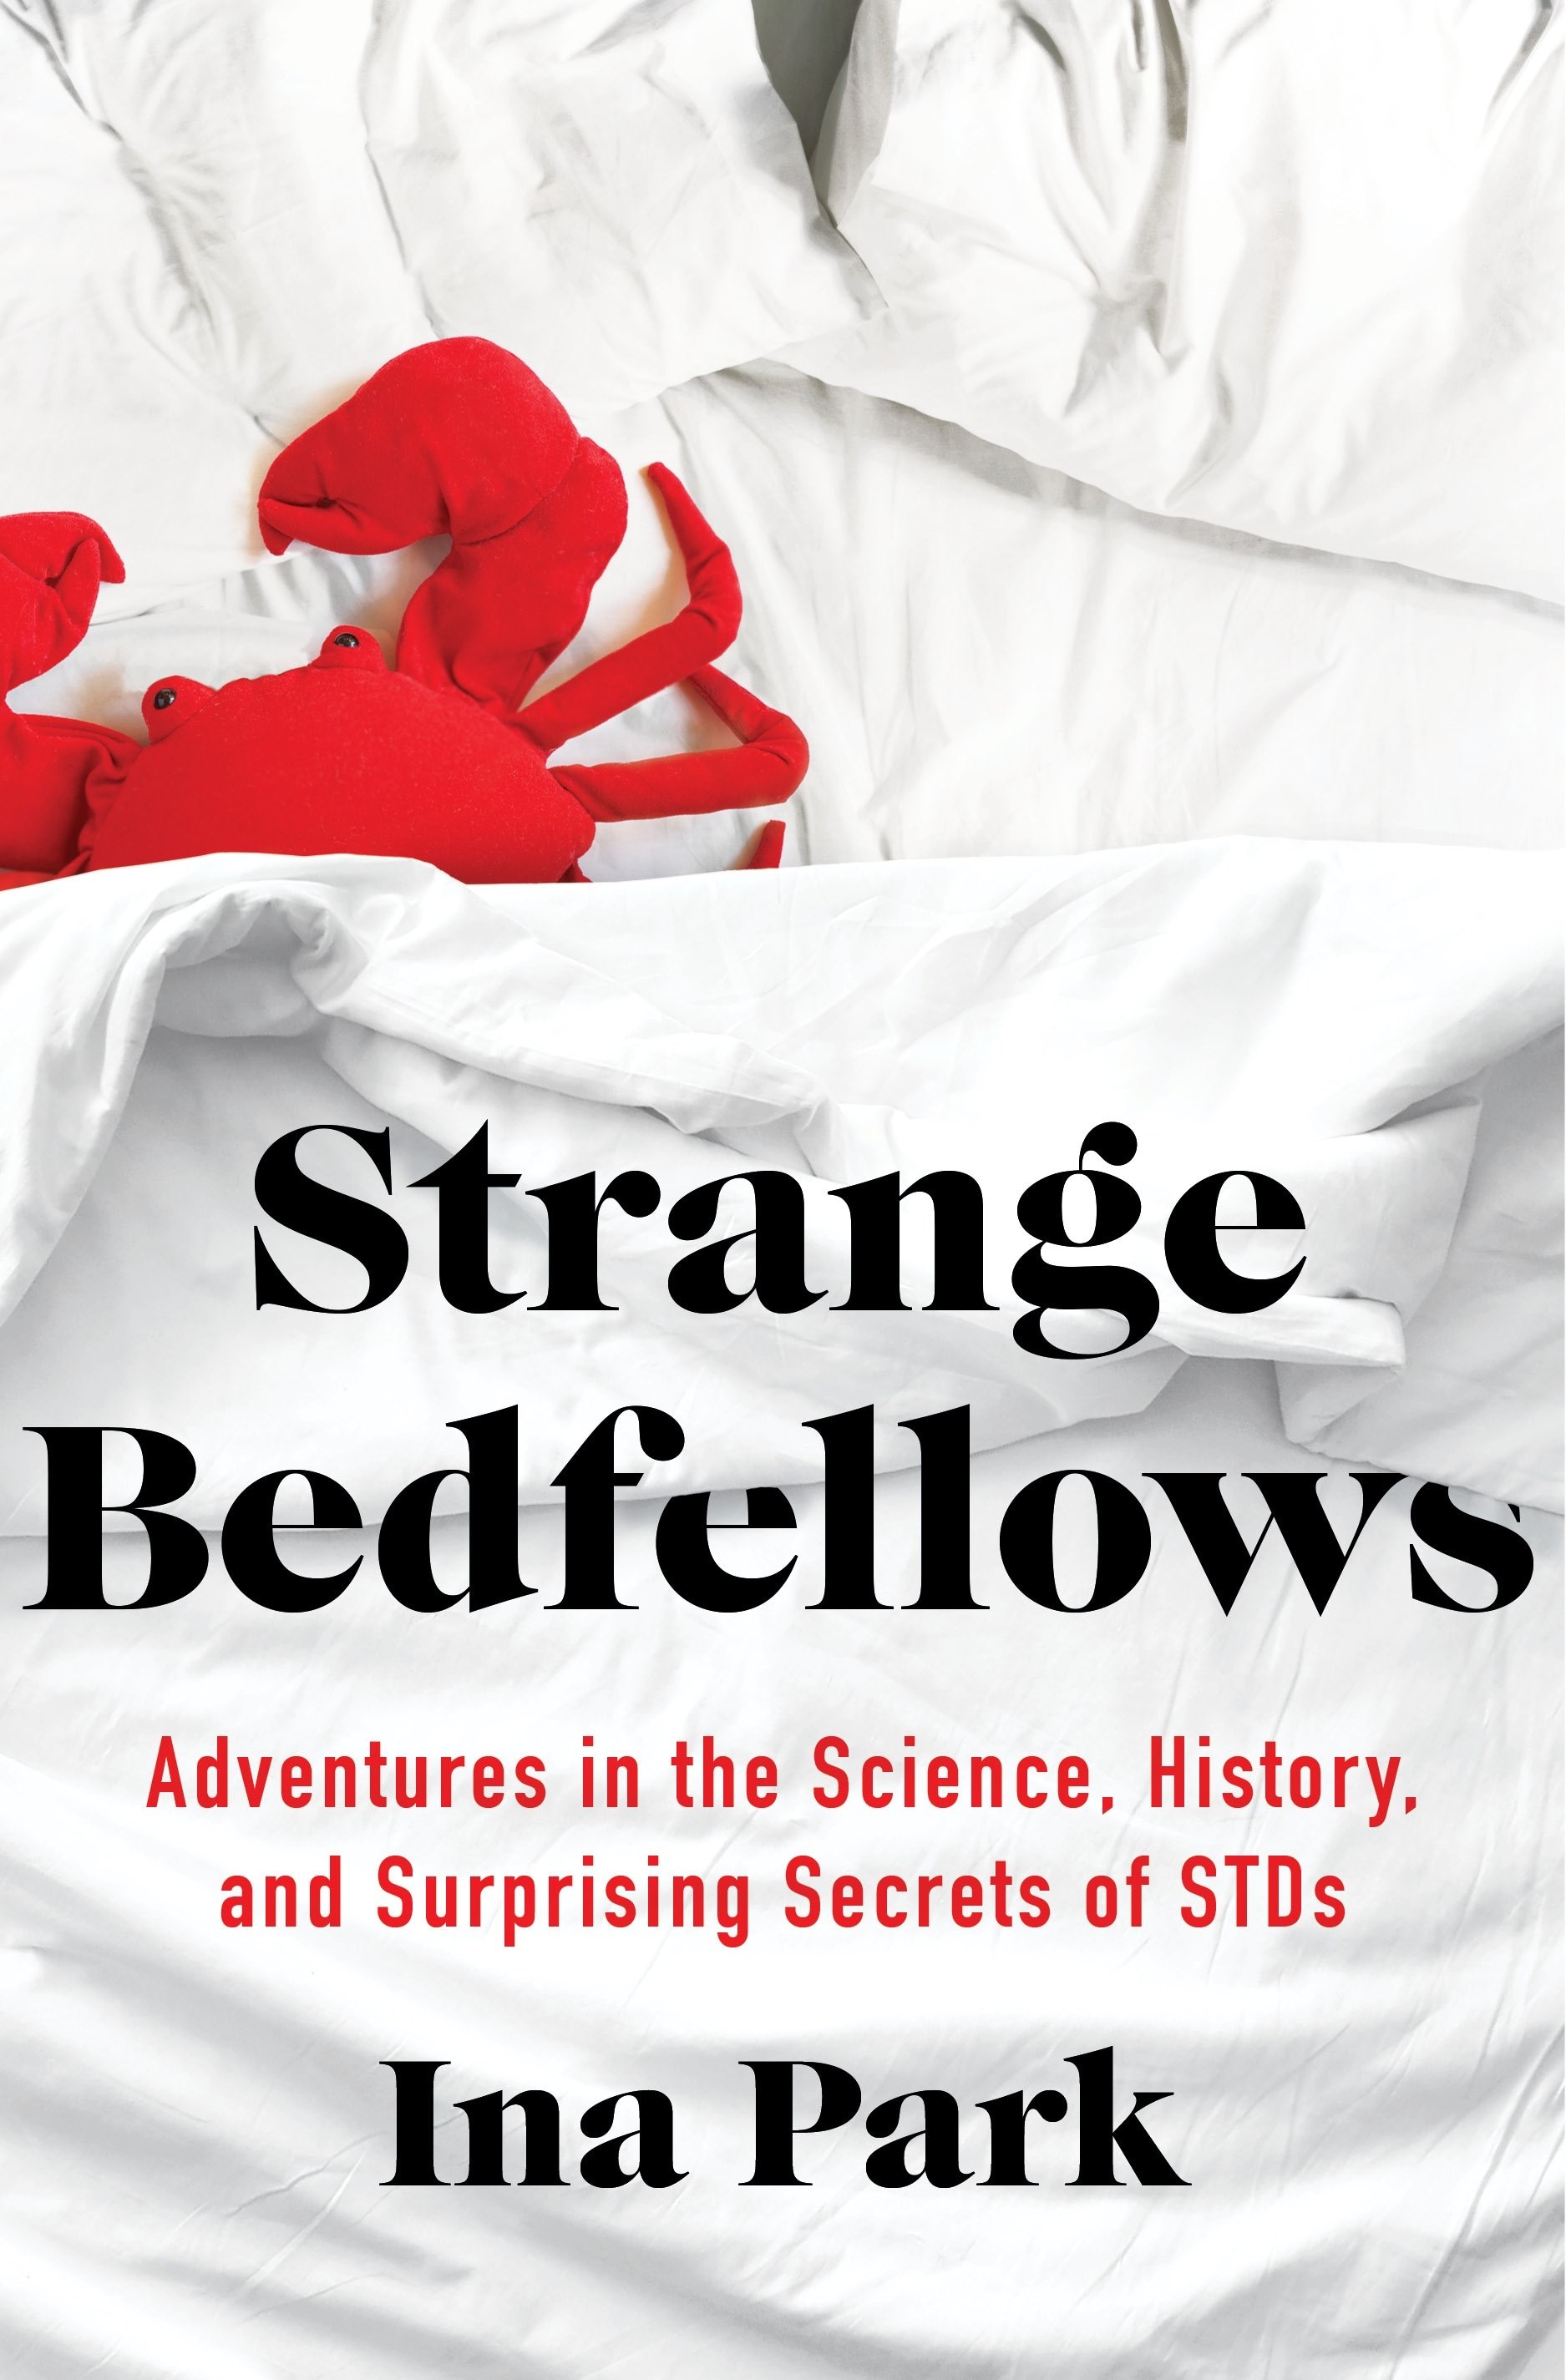 Book “Strange Bedfellows” by Ina Park — February 2, 2021